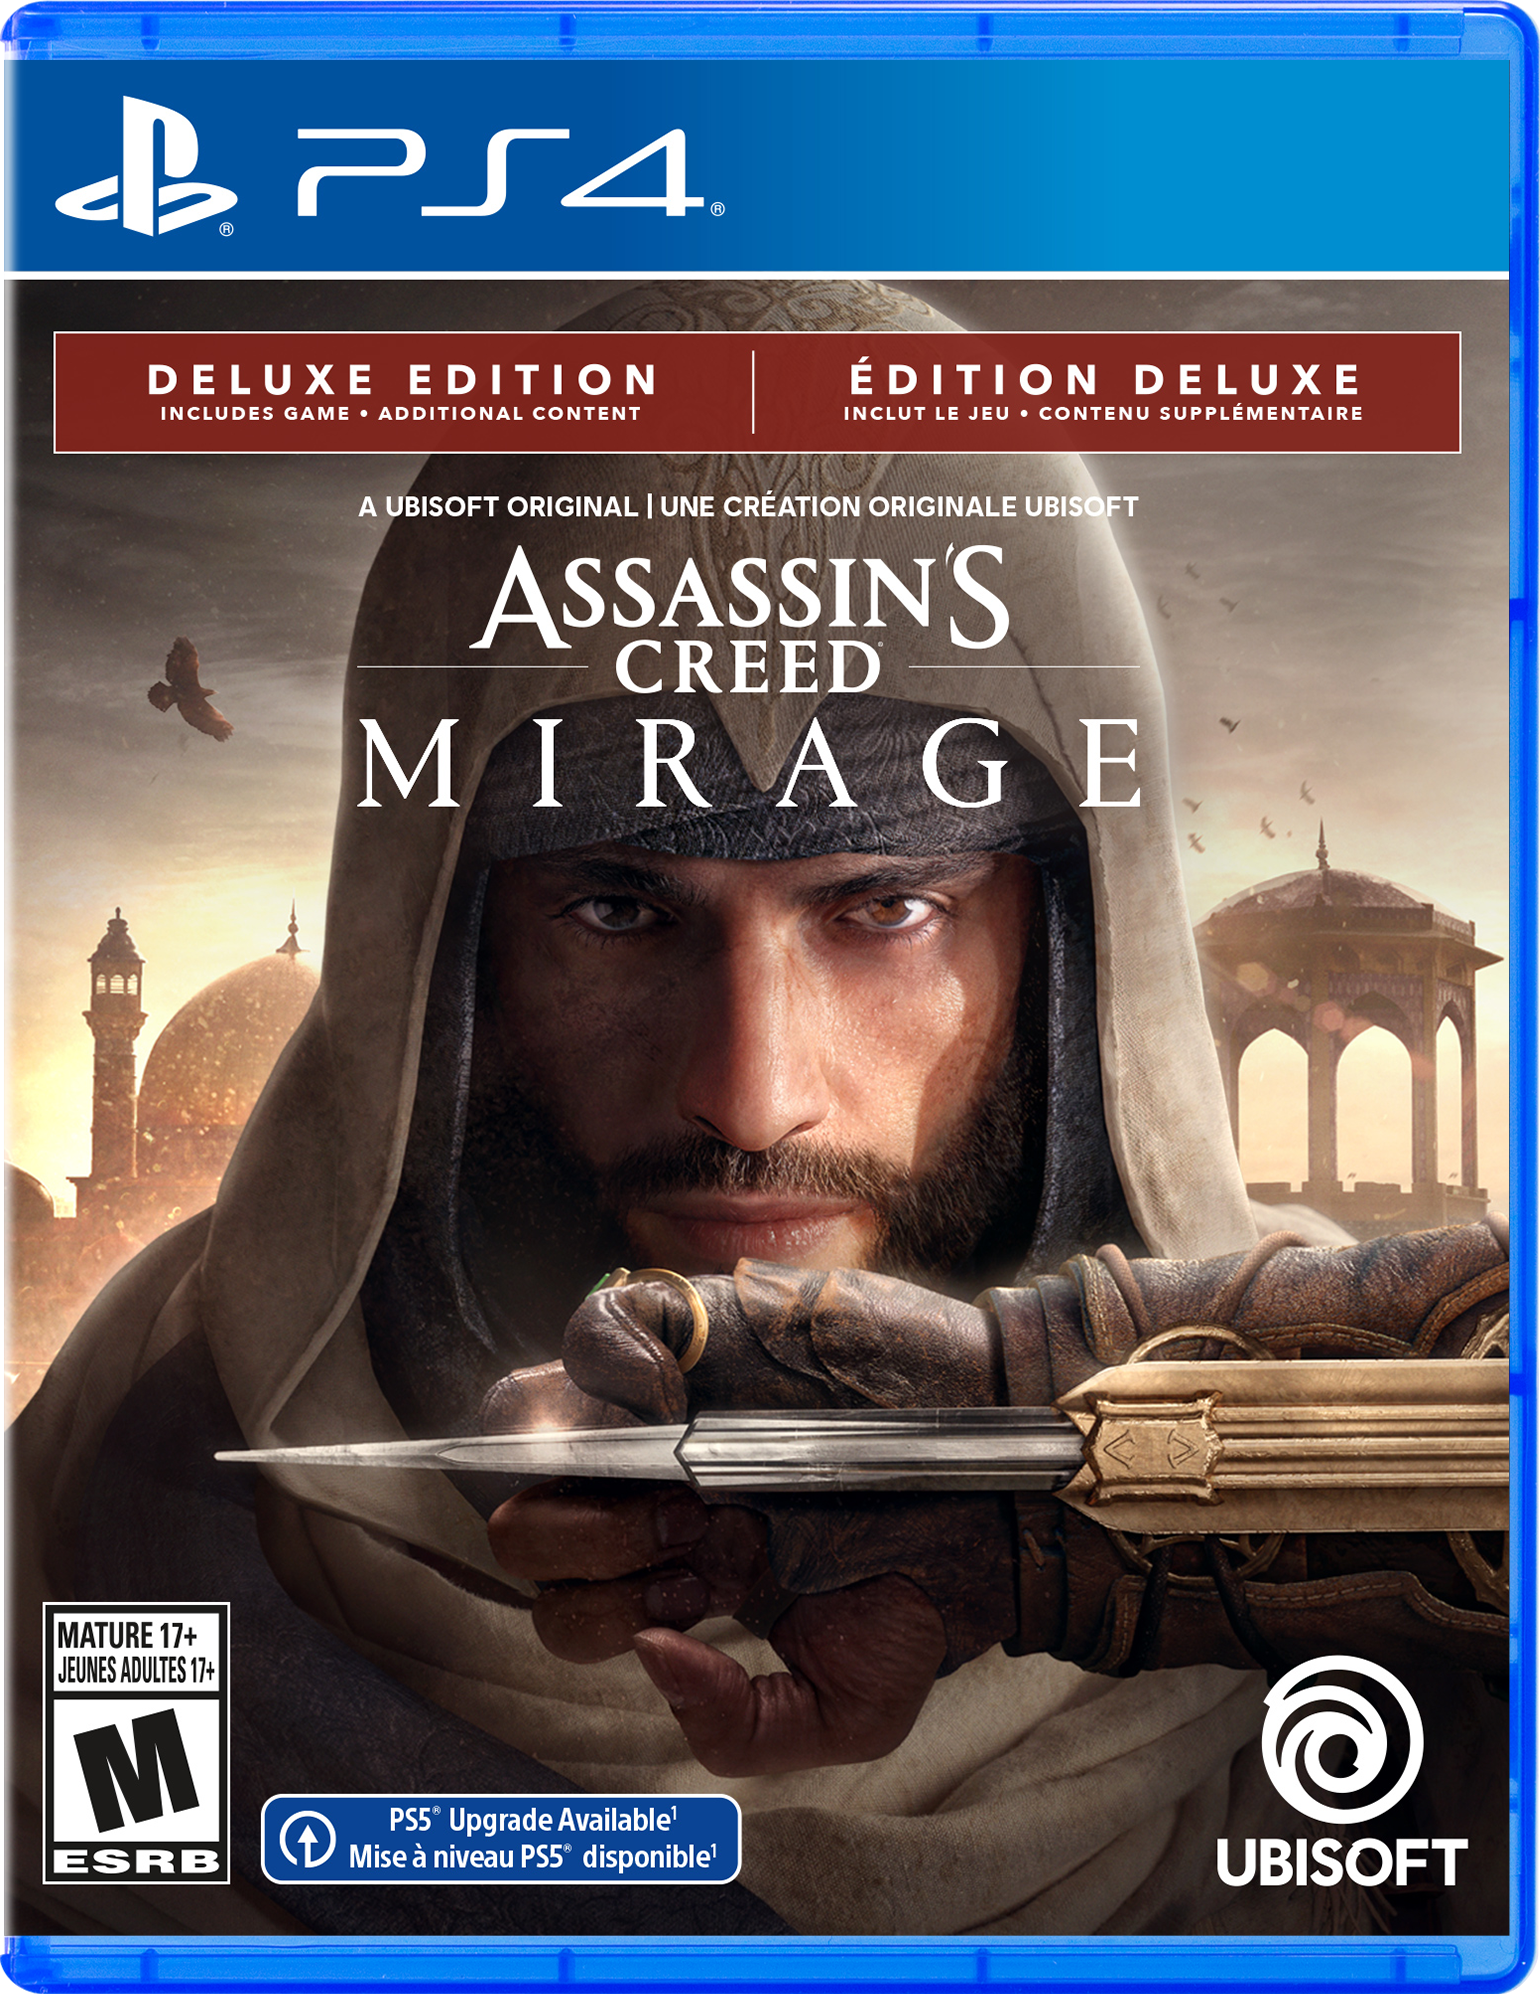 Assassin's Creed Mirage Deluxe Edition - PlayStation 4, PlayStation 4